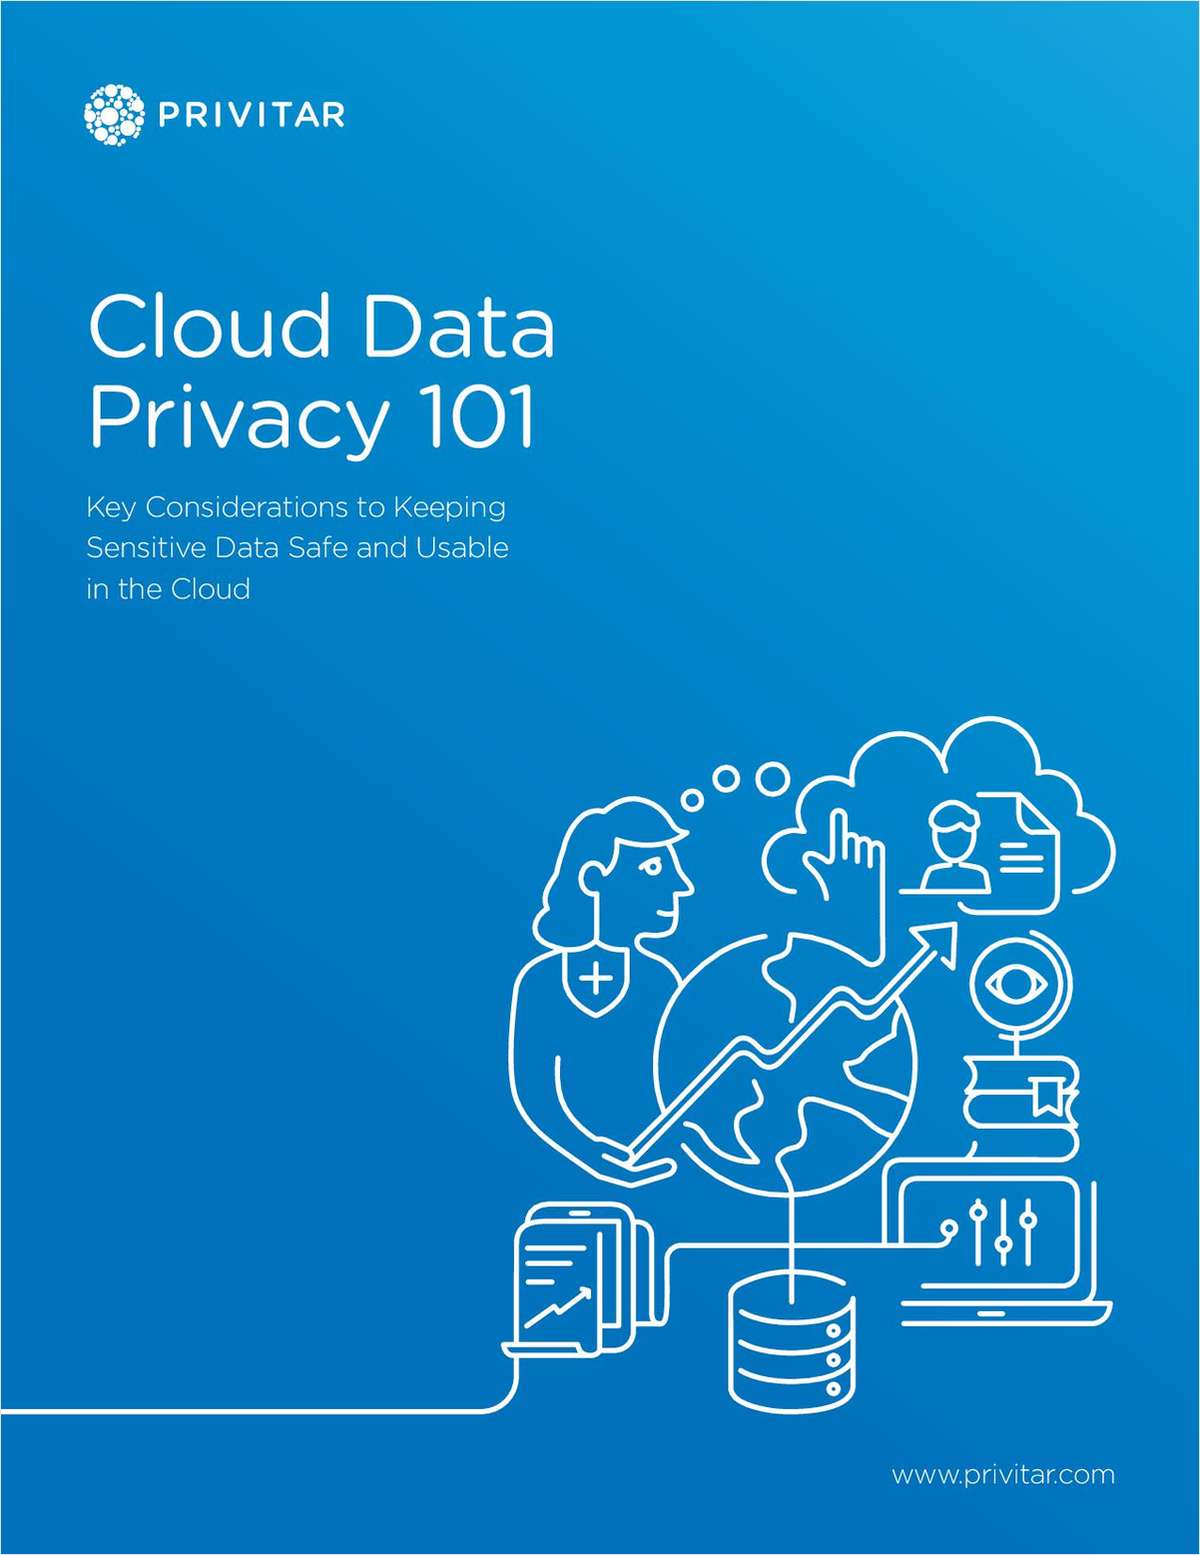 Introduction to Cloud Data Privacy